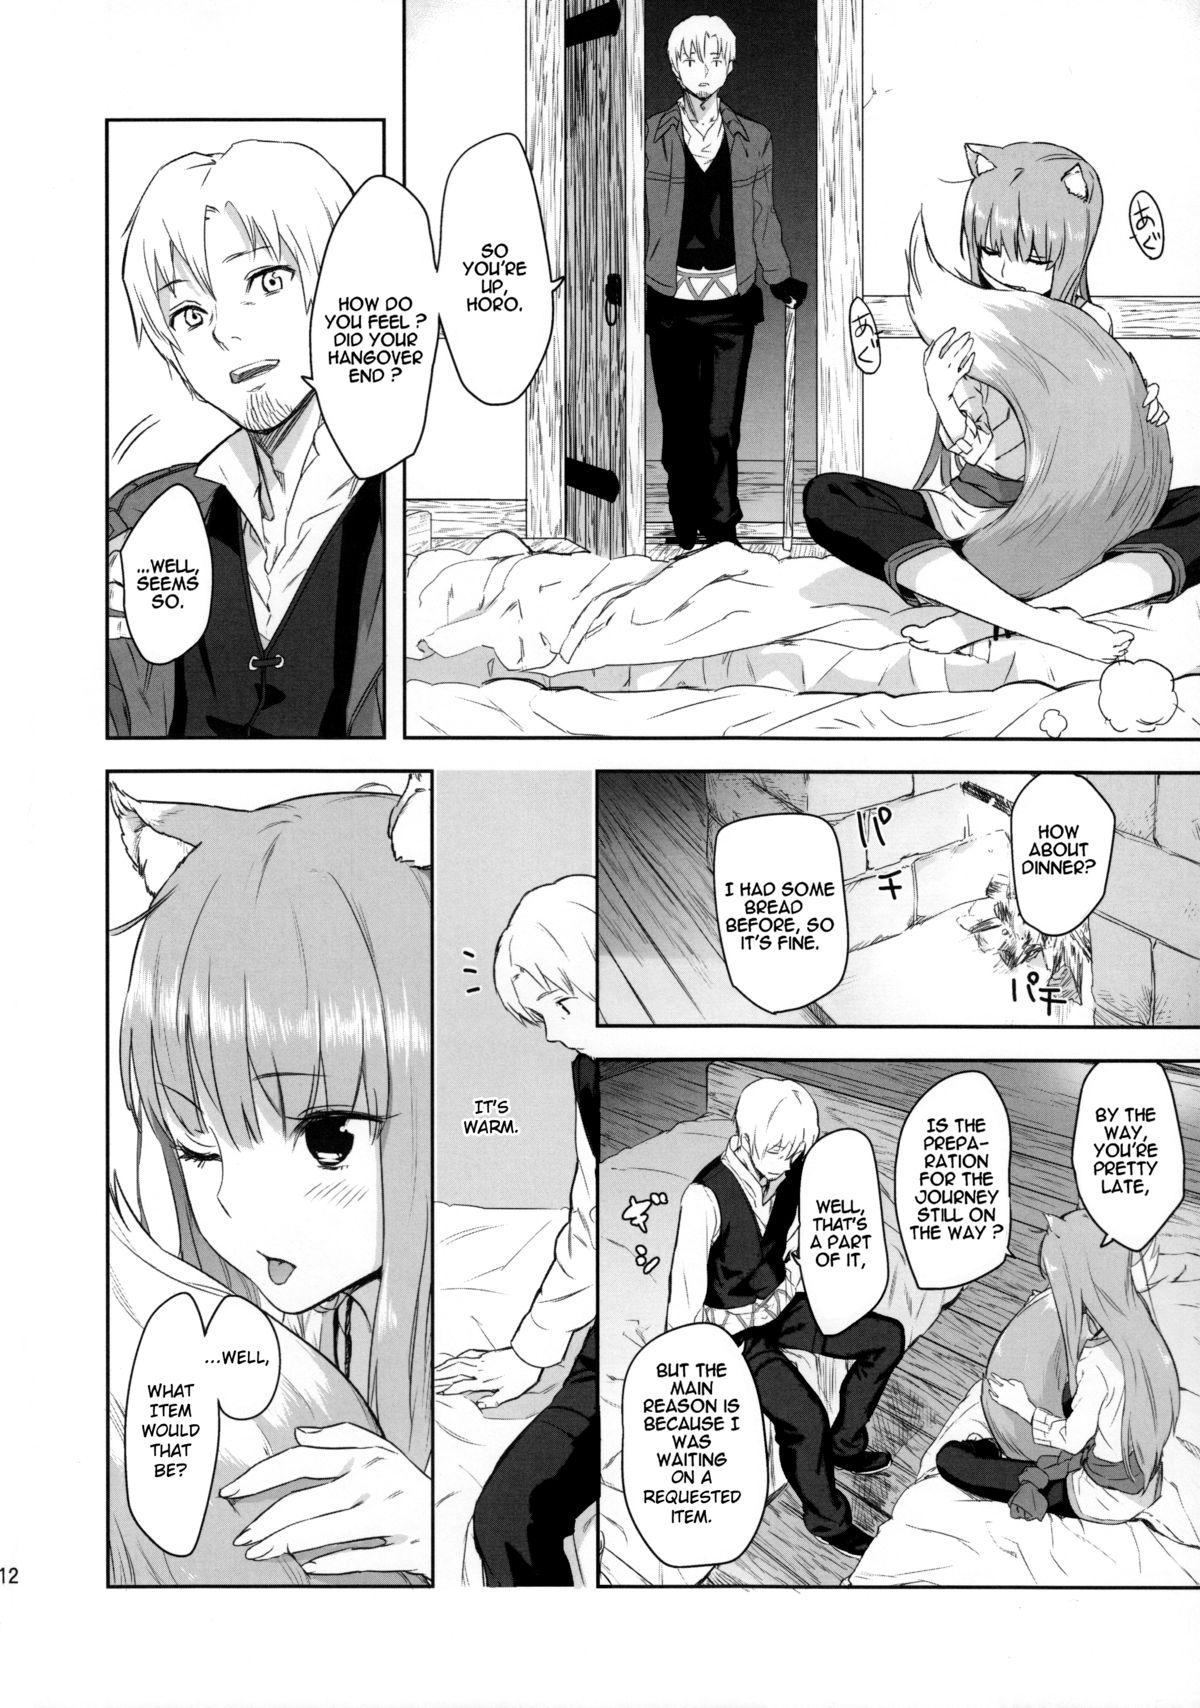 Sixtynine Harvest II - Spice and wolf Hardcore - Page 12